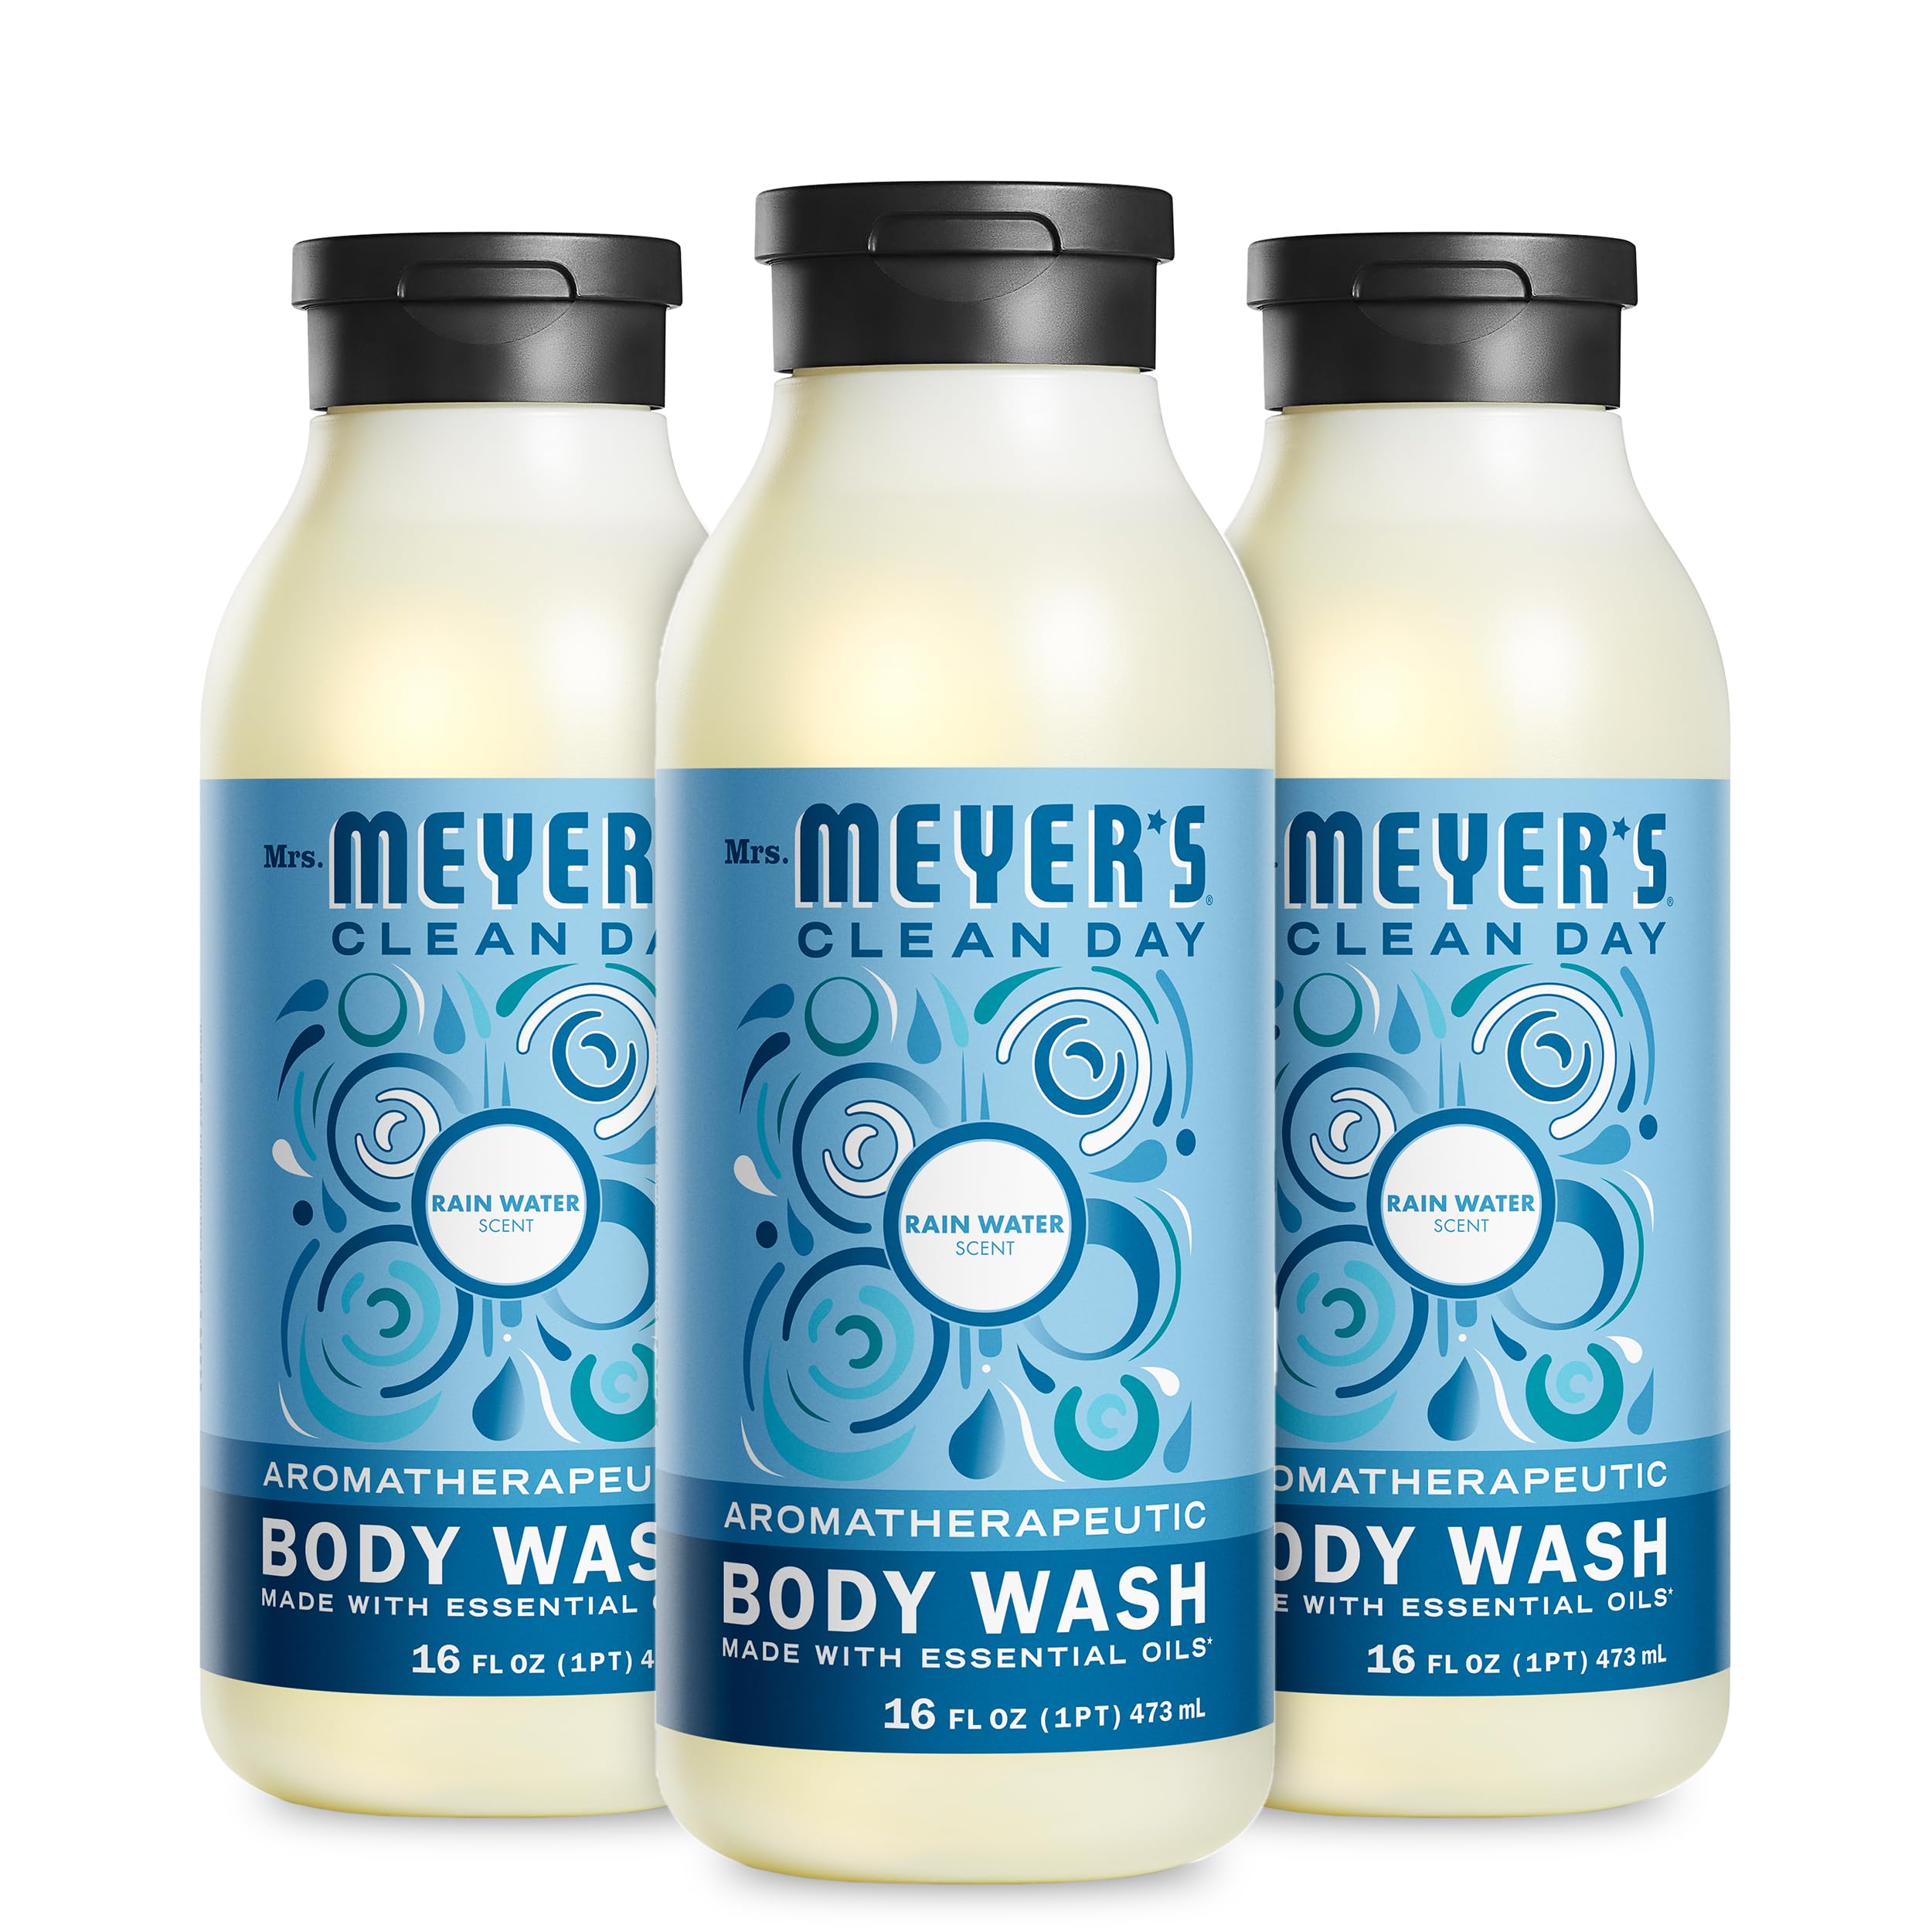 Mrs. Meyer's Moisturizing Body Wash for Women and Men, Biodegradable Shower Gel Formula Made with Essential Oils, Rain Water, 16 oz Bottle, Pack of 3